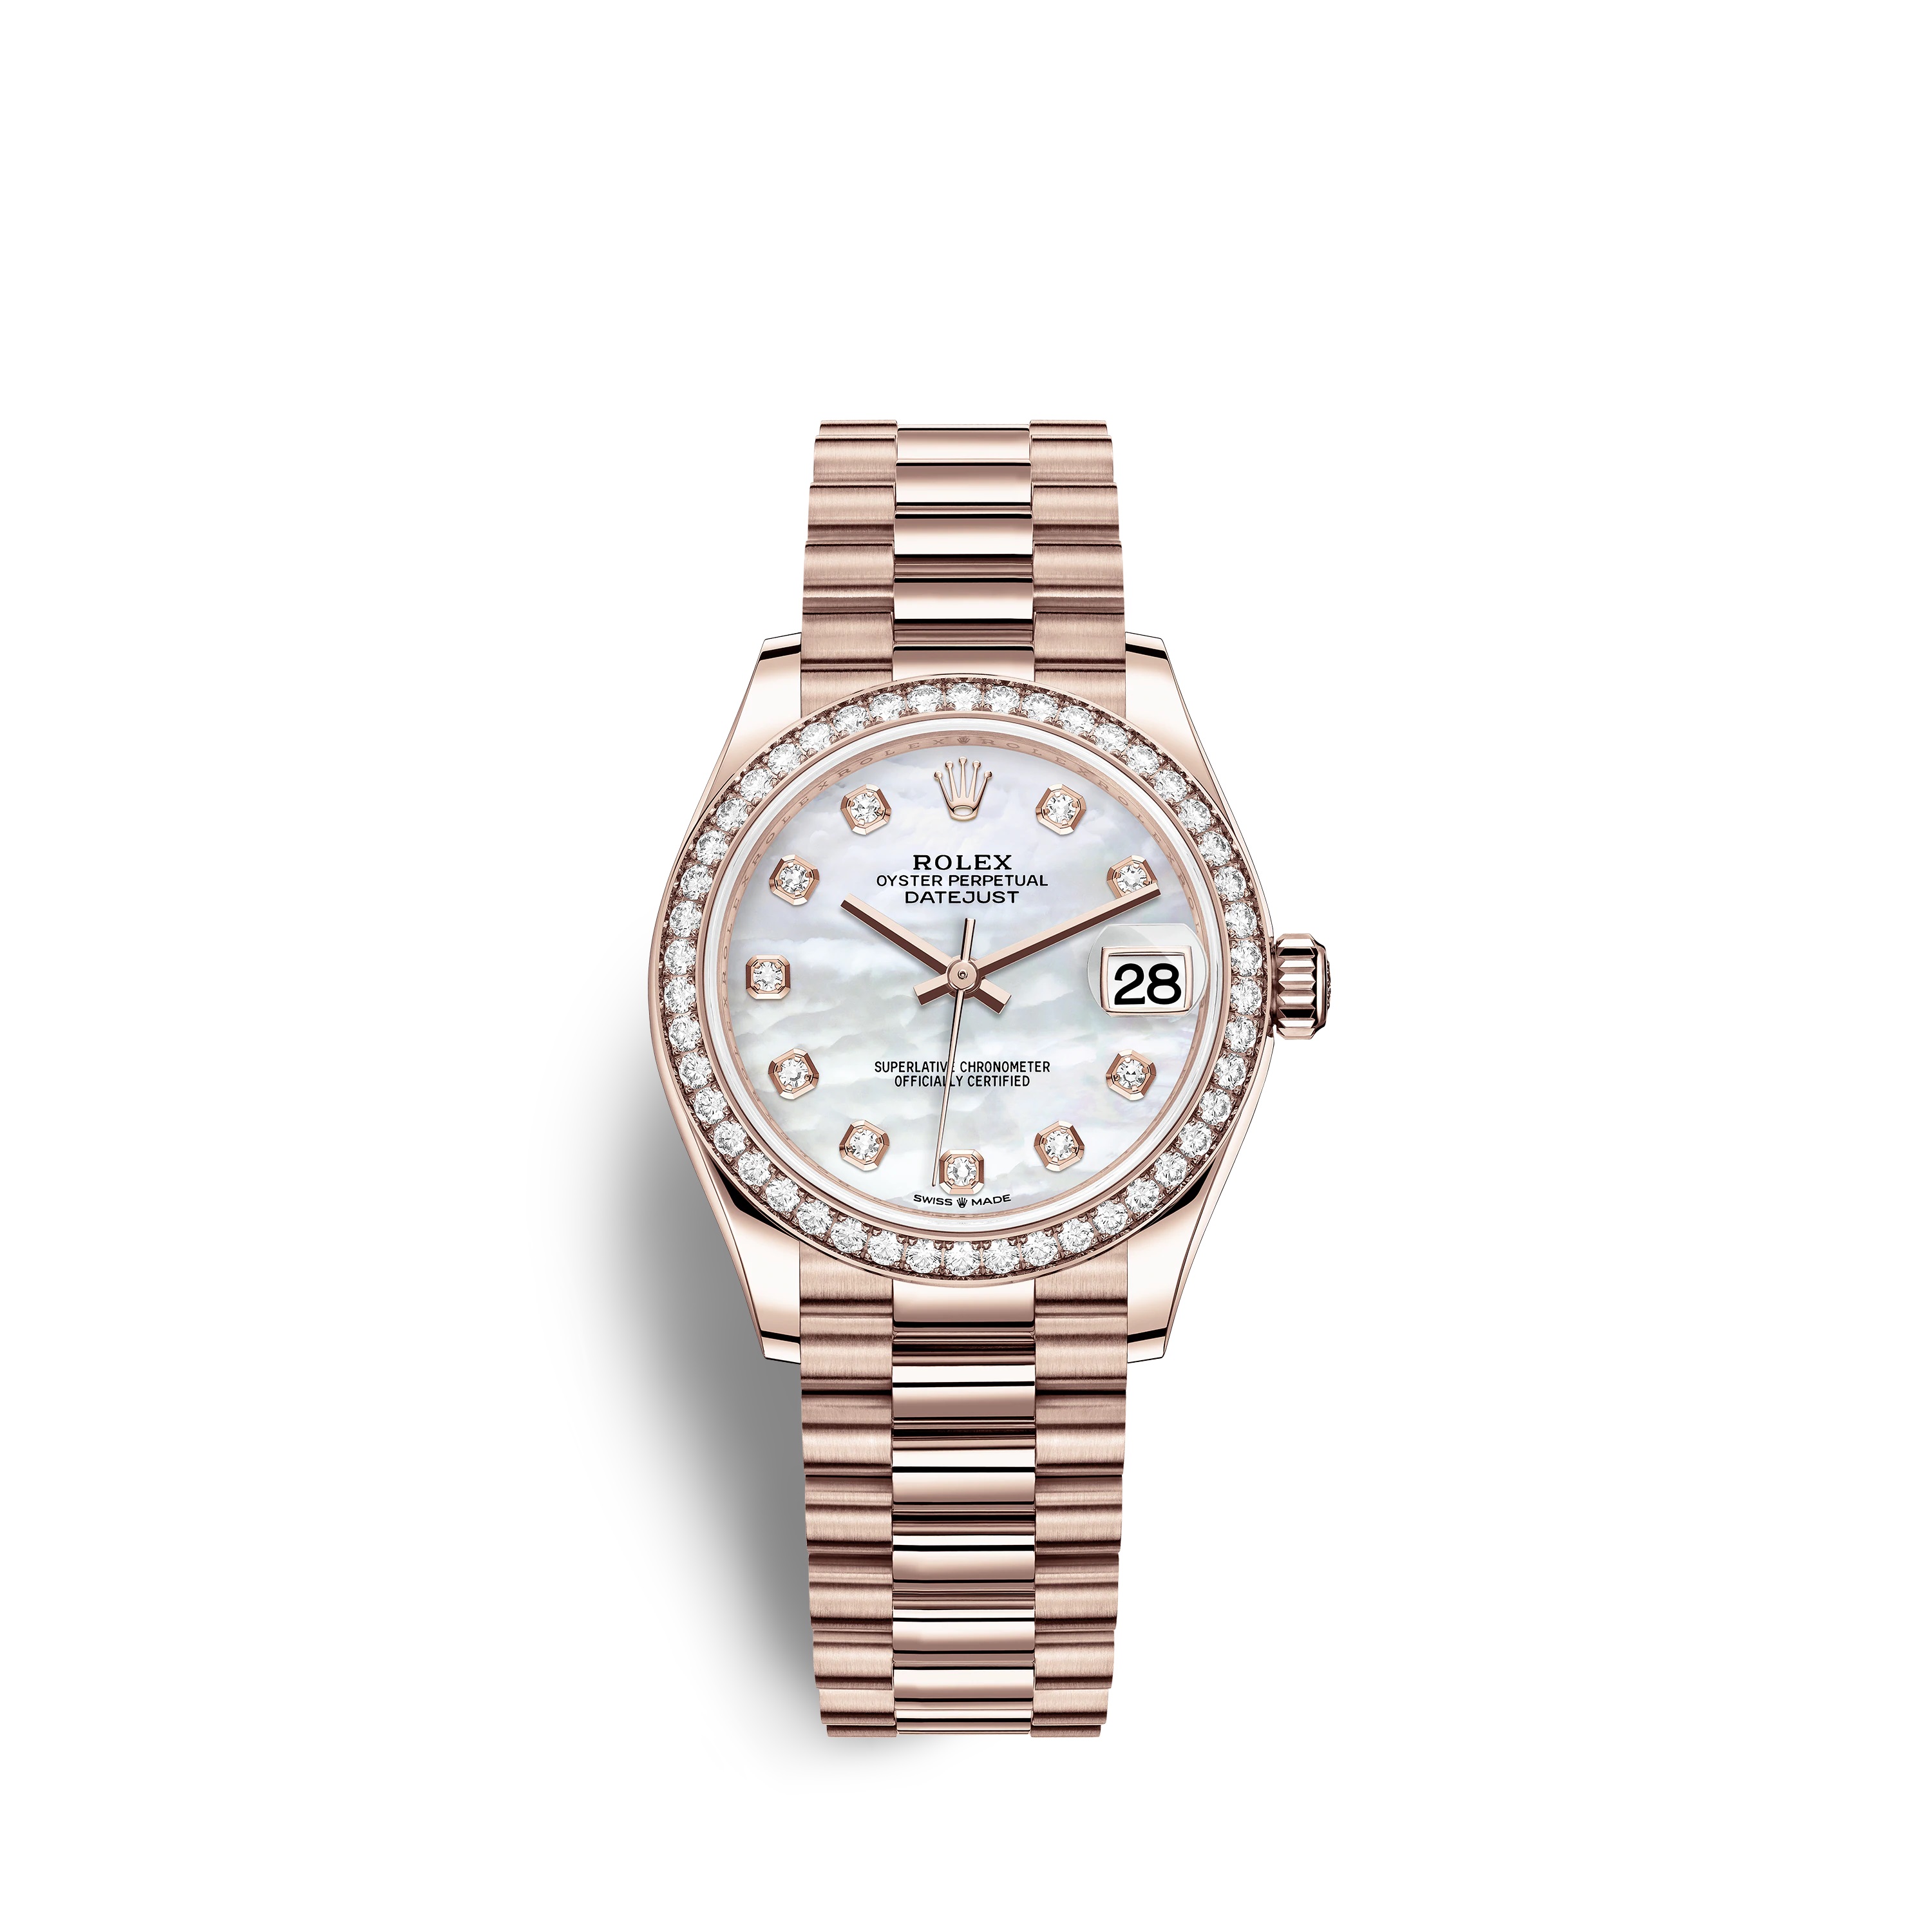 Datejust 31 278285RBR Rose Gold Watch (White Mother-of-Pearl Set with Diamonds)